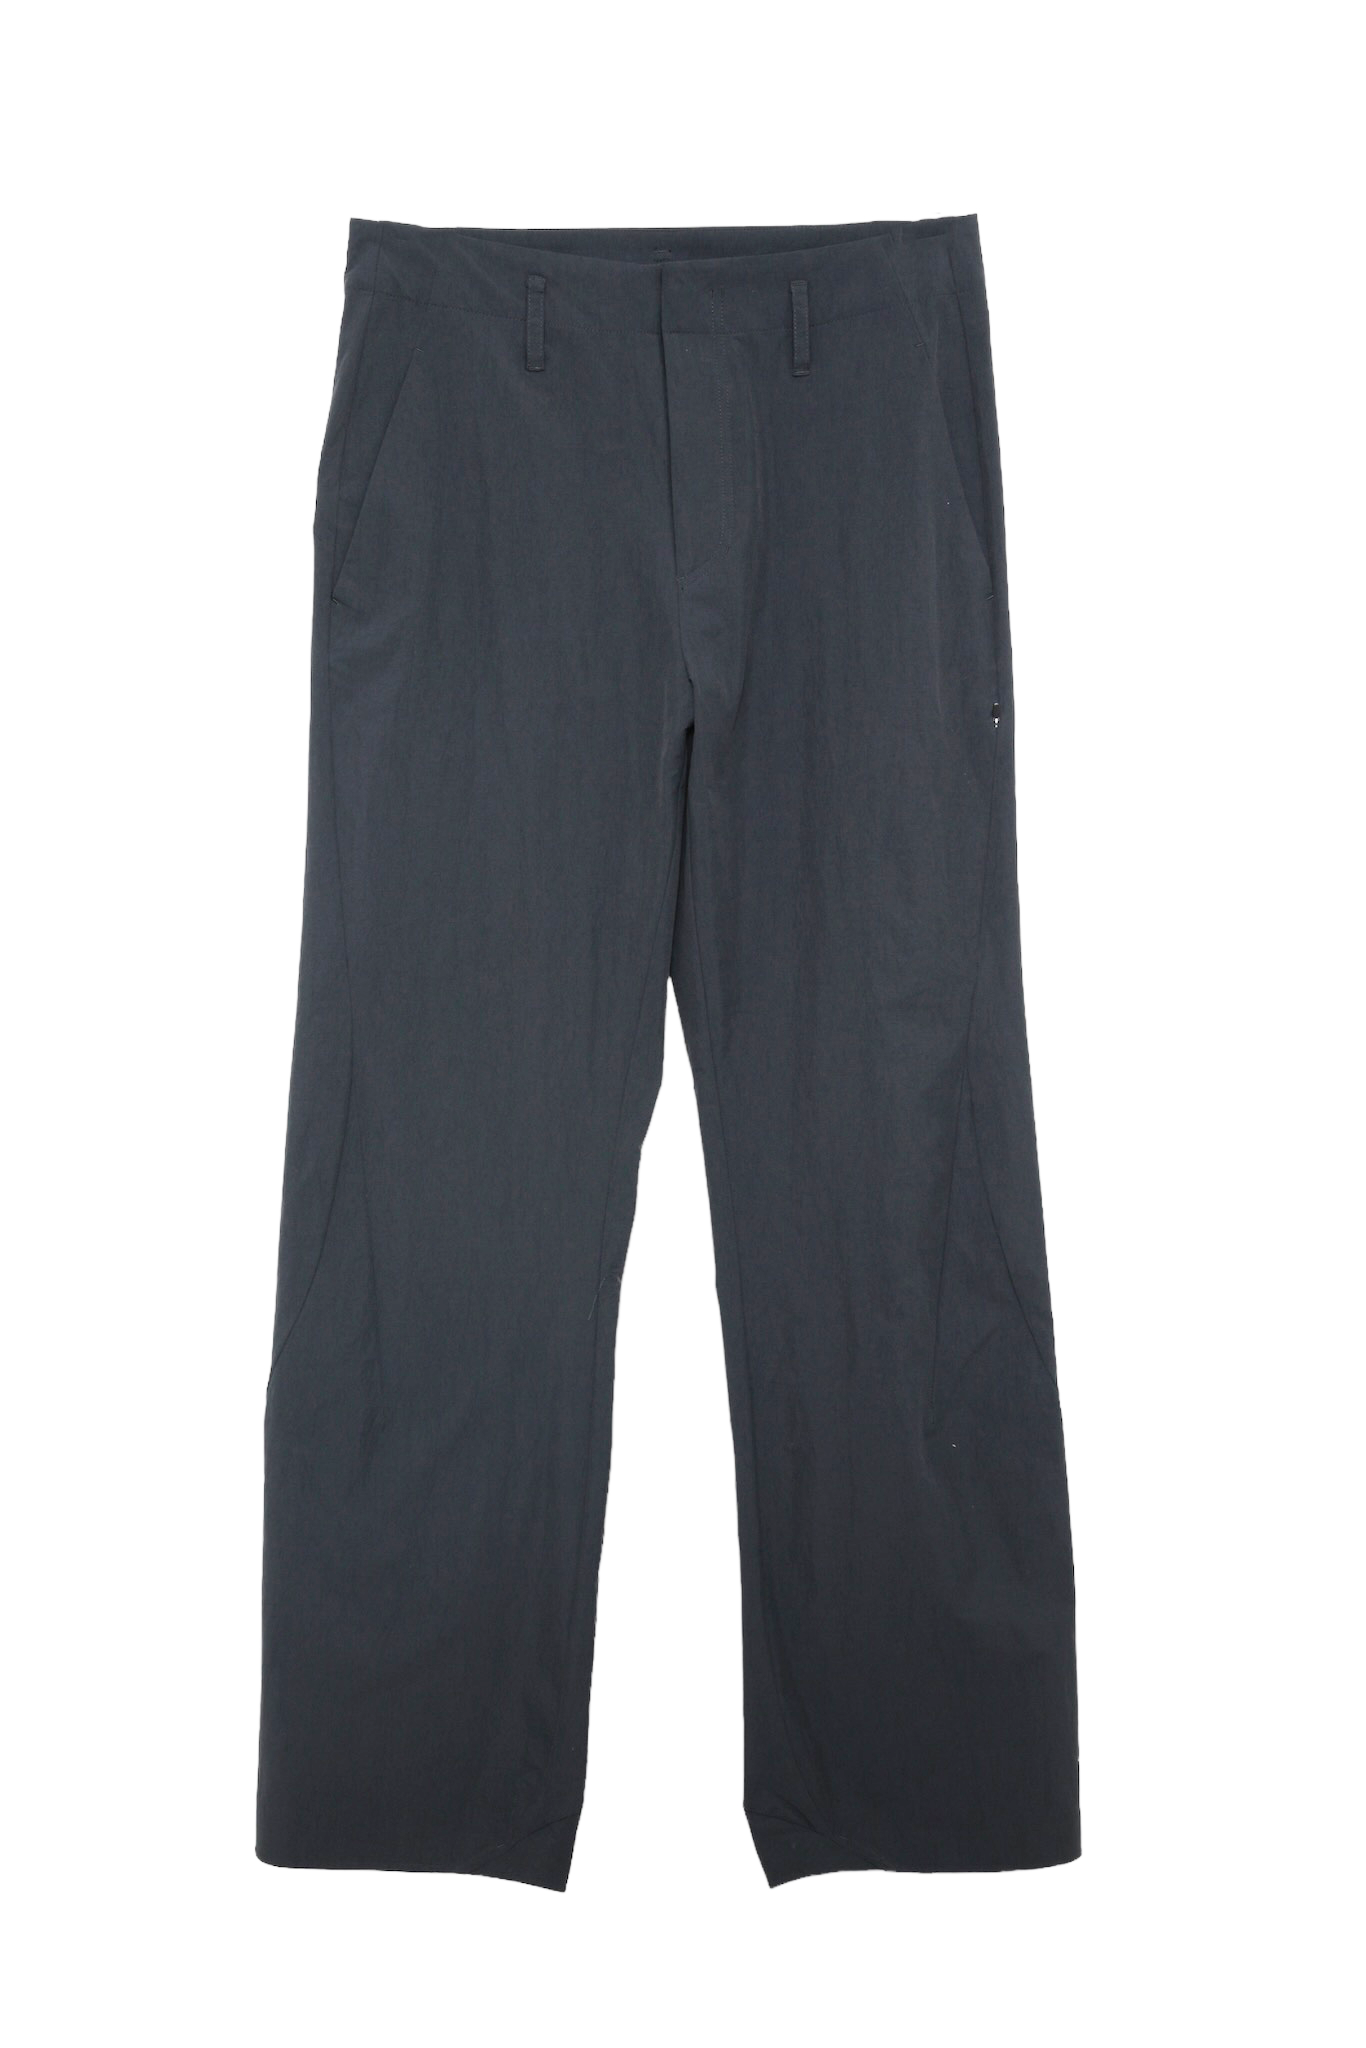 PAF 6.0 TROUSER RIGHT